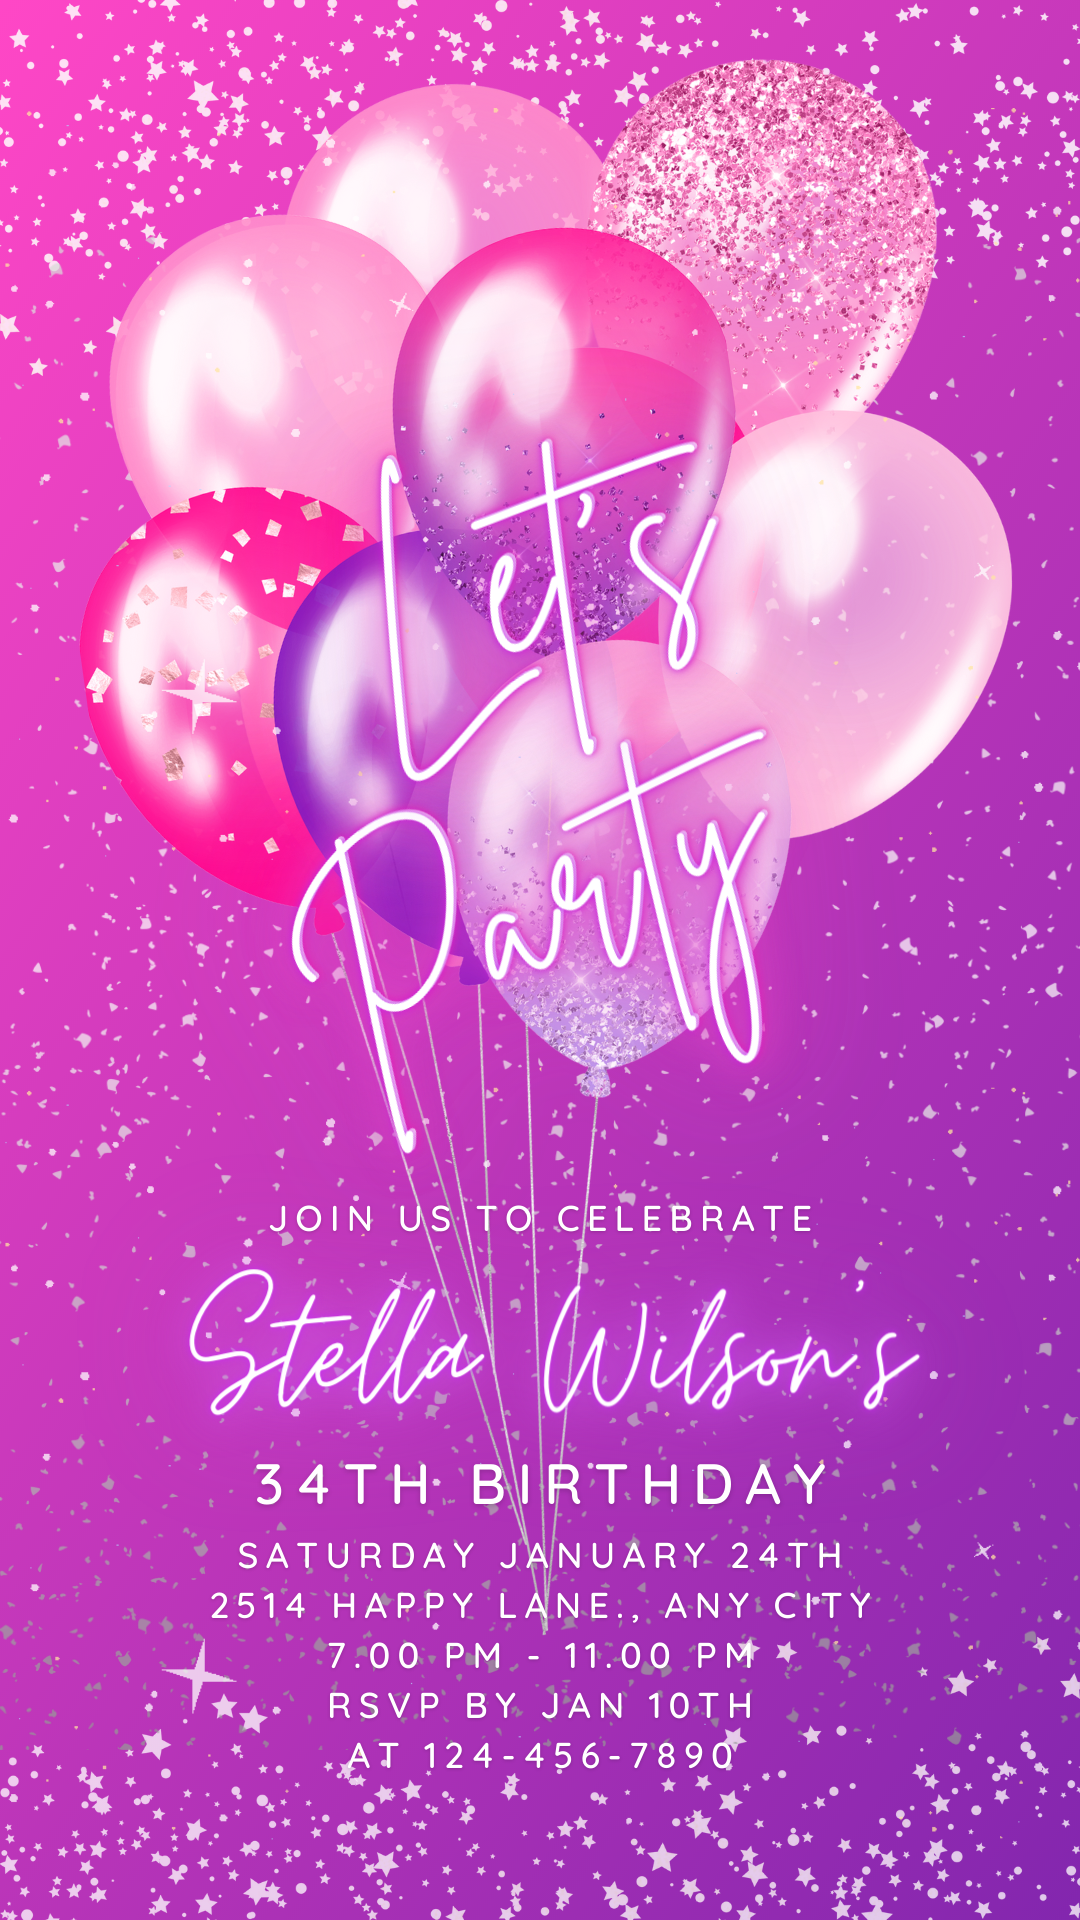 Let's Party Animated Invite for any Event Celebration, Editable Video Template, Birthday invitation for any Age | Bright Purple Pink E-vite